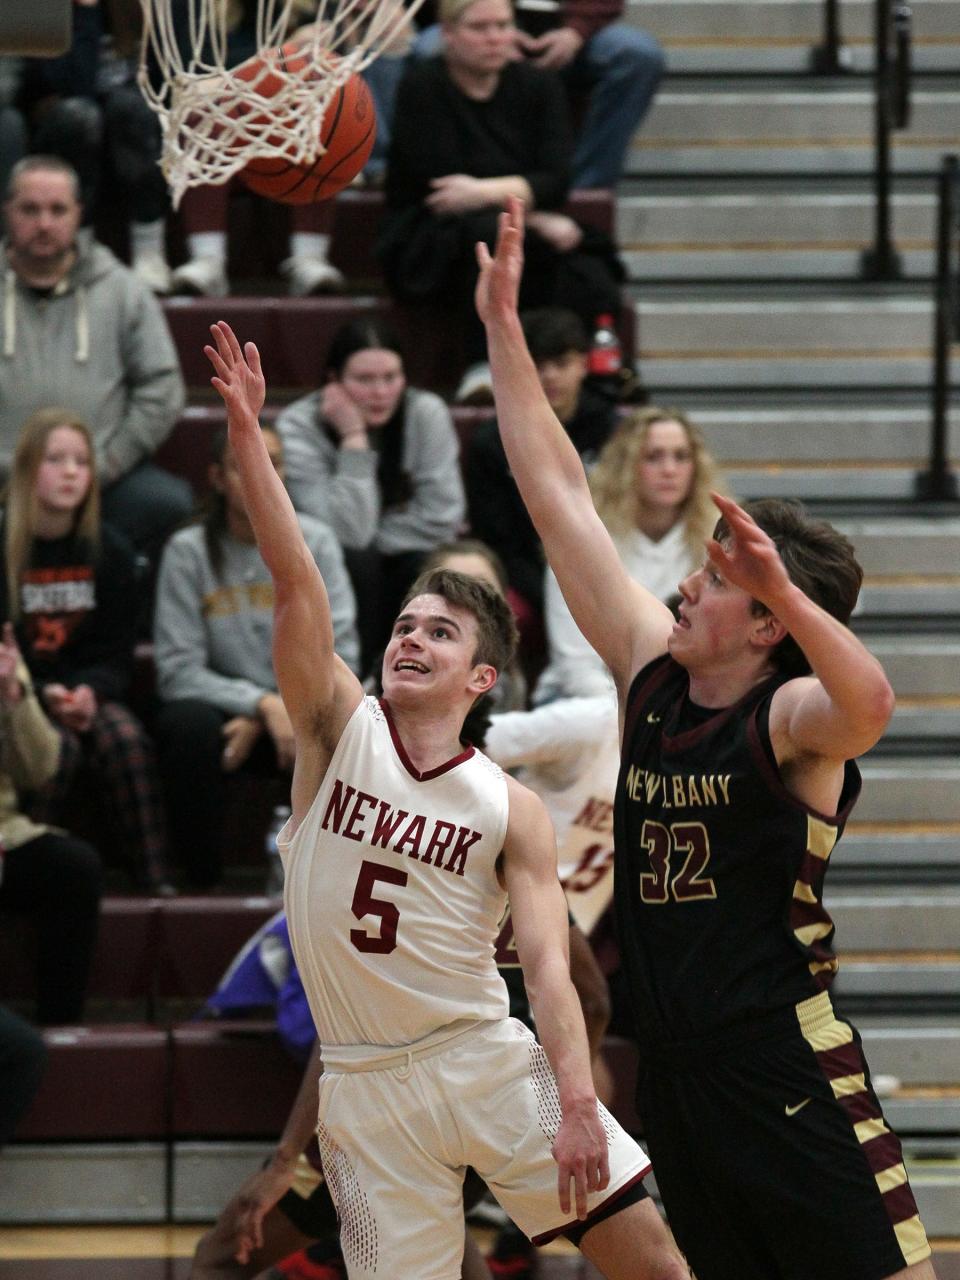 Grant Burkholder and Newark play Olentangy Orange in a regional semifinal Wednesday at Ohio Dominican.